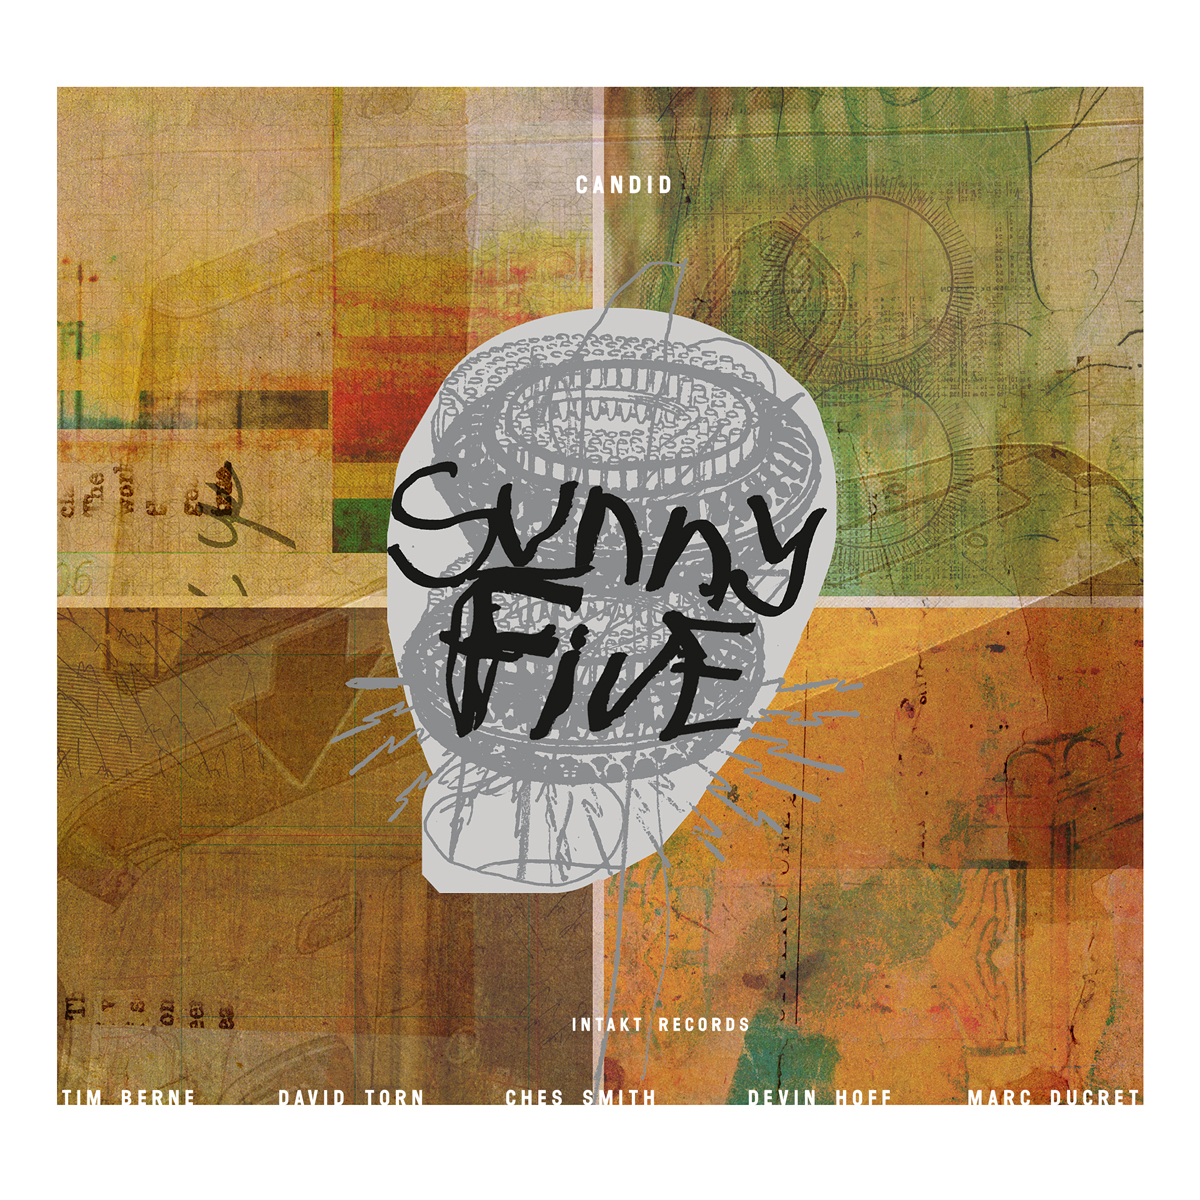 SUNNY FIVE
TIM BERNE – DAVID TORN – CHES SMITH – DEVIN HOFF – MARC DUCRET. CANDID. intakt records 415 Cover